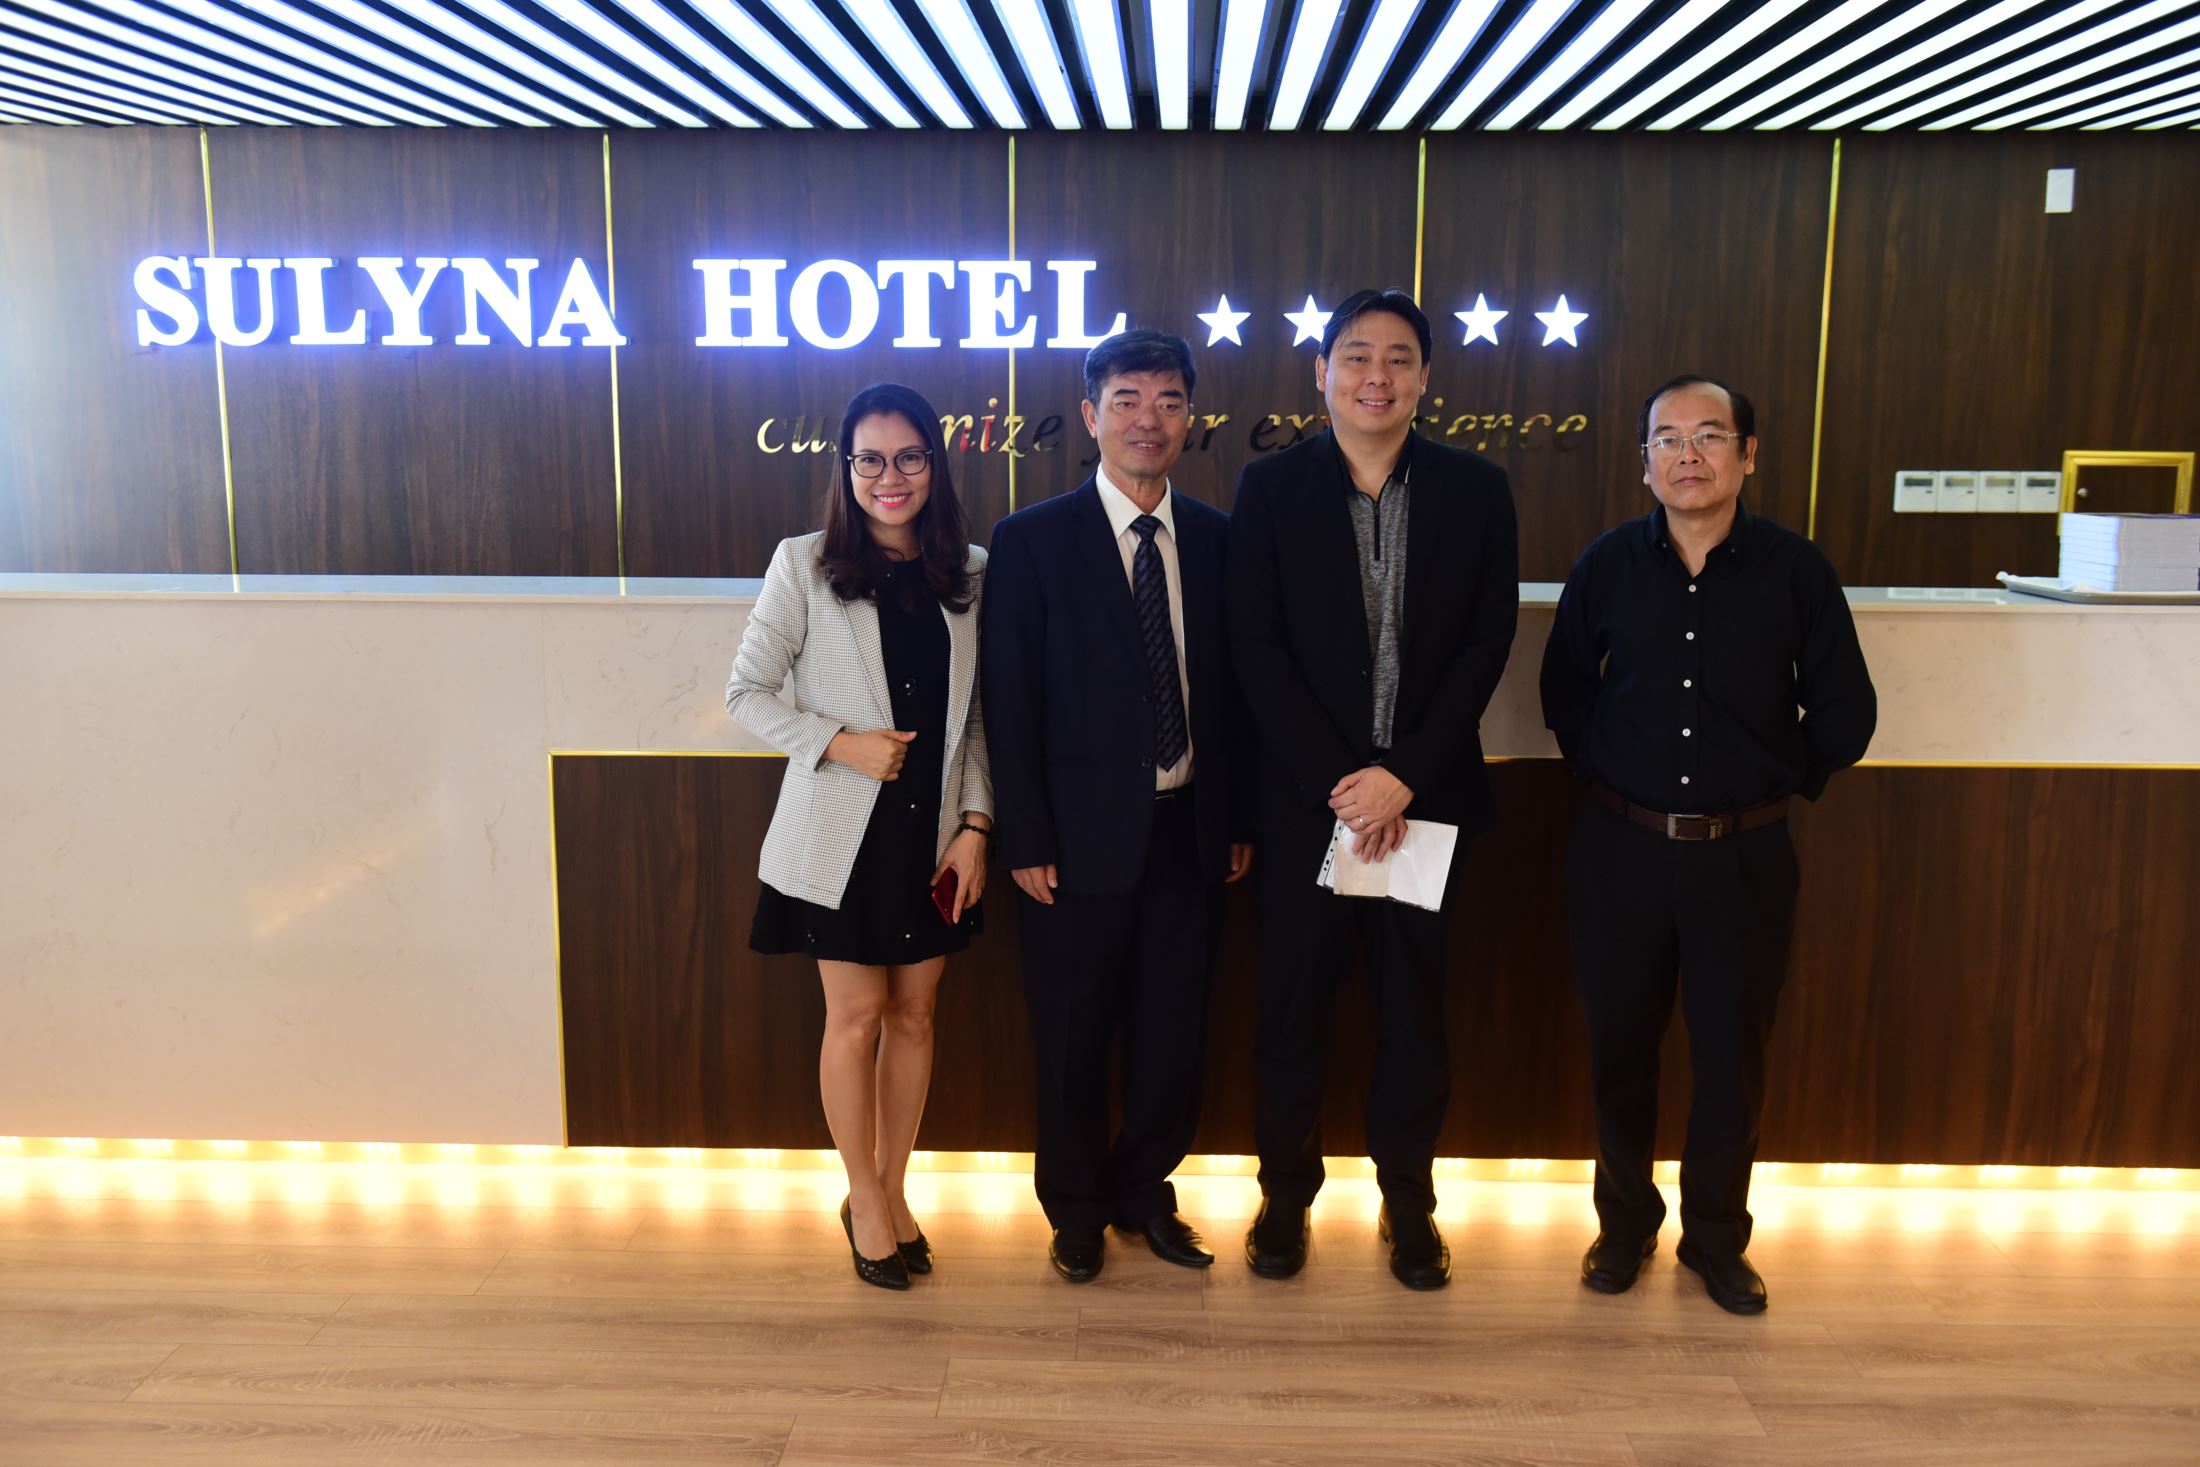 Prof. Dr. Thai Ba Can – President of HIU, Dr. Do Manh Cuong – Permanent Member of Education Council, Academic Director, NHG and Ms. Tran Thuy Tram Quyen – Director of Communications and Branding, NHG welcome Adam Khoo at Sulyna Hotel, HIU, HCMC in the morning of May 6th 2018.